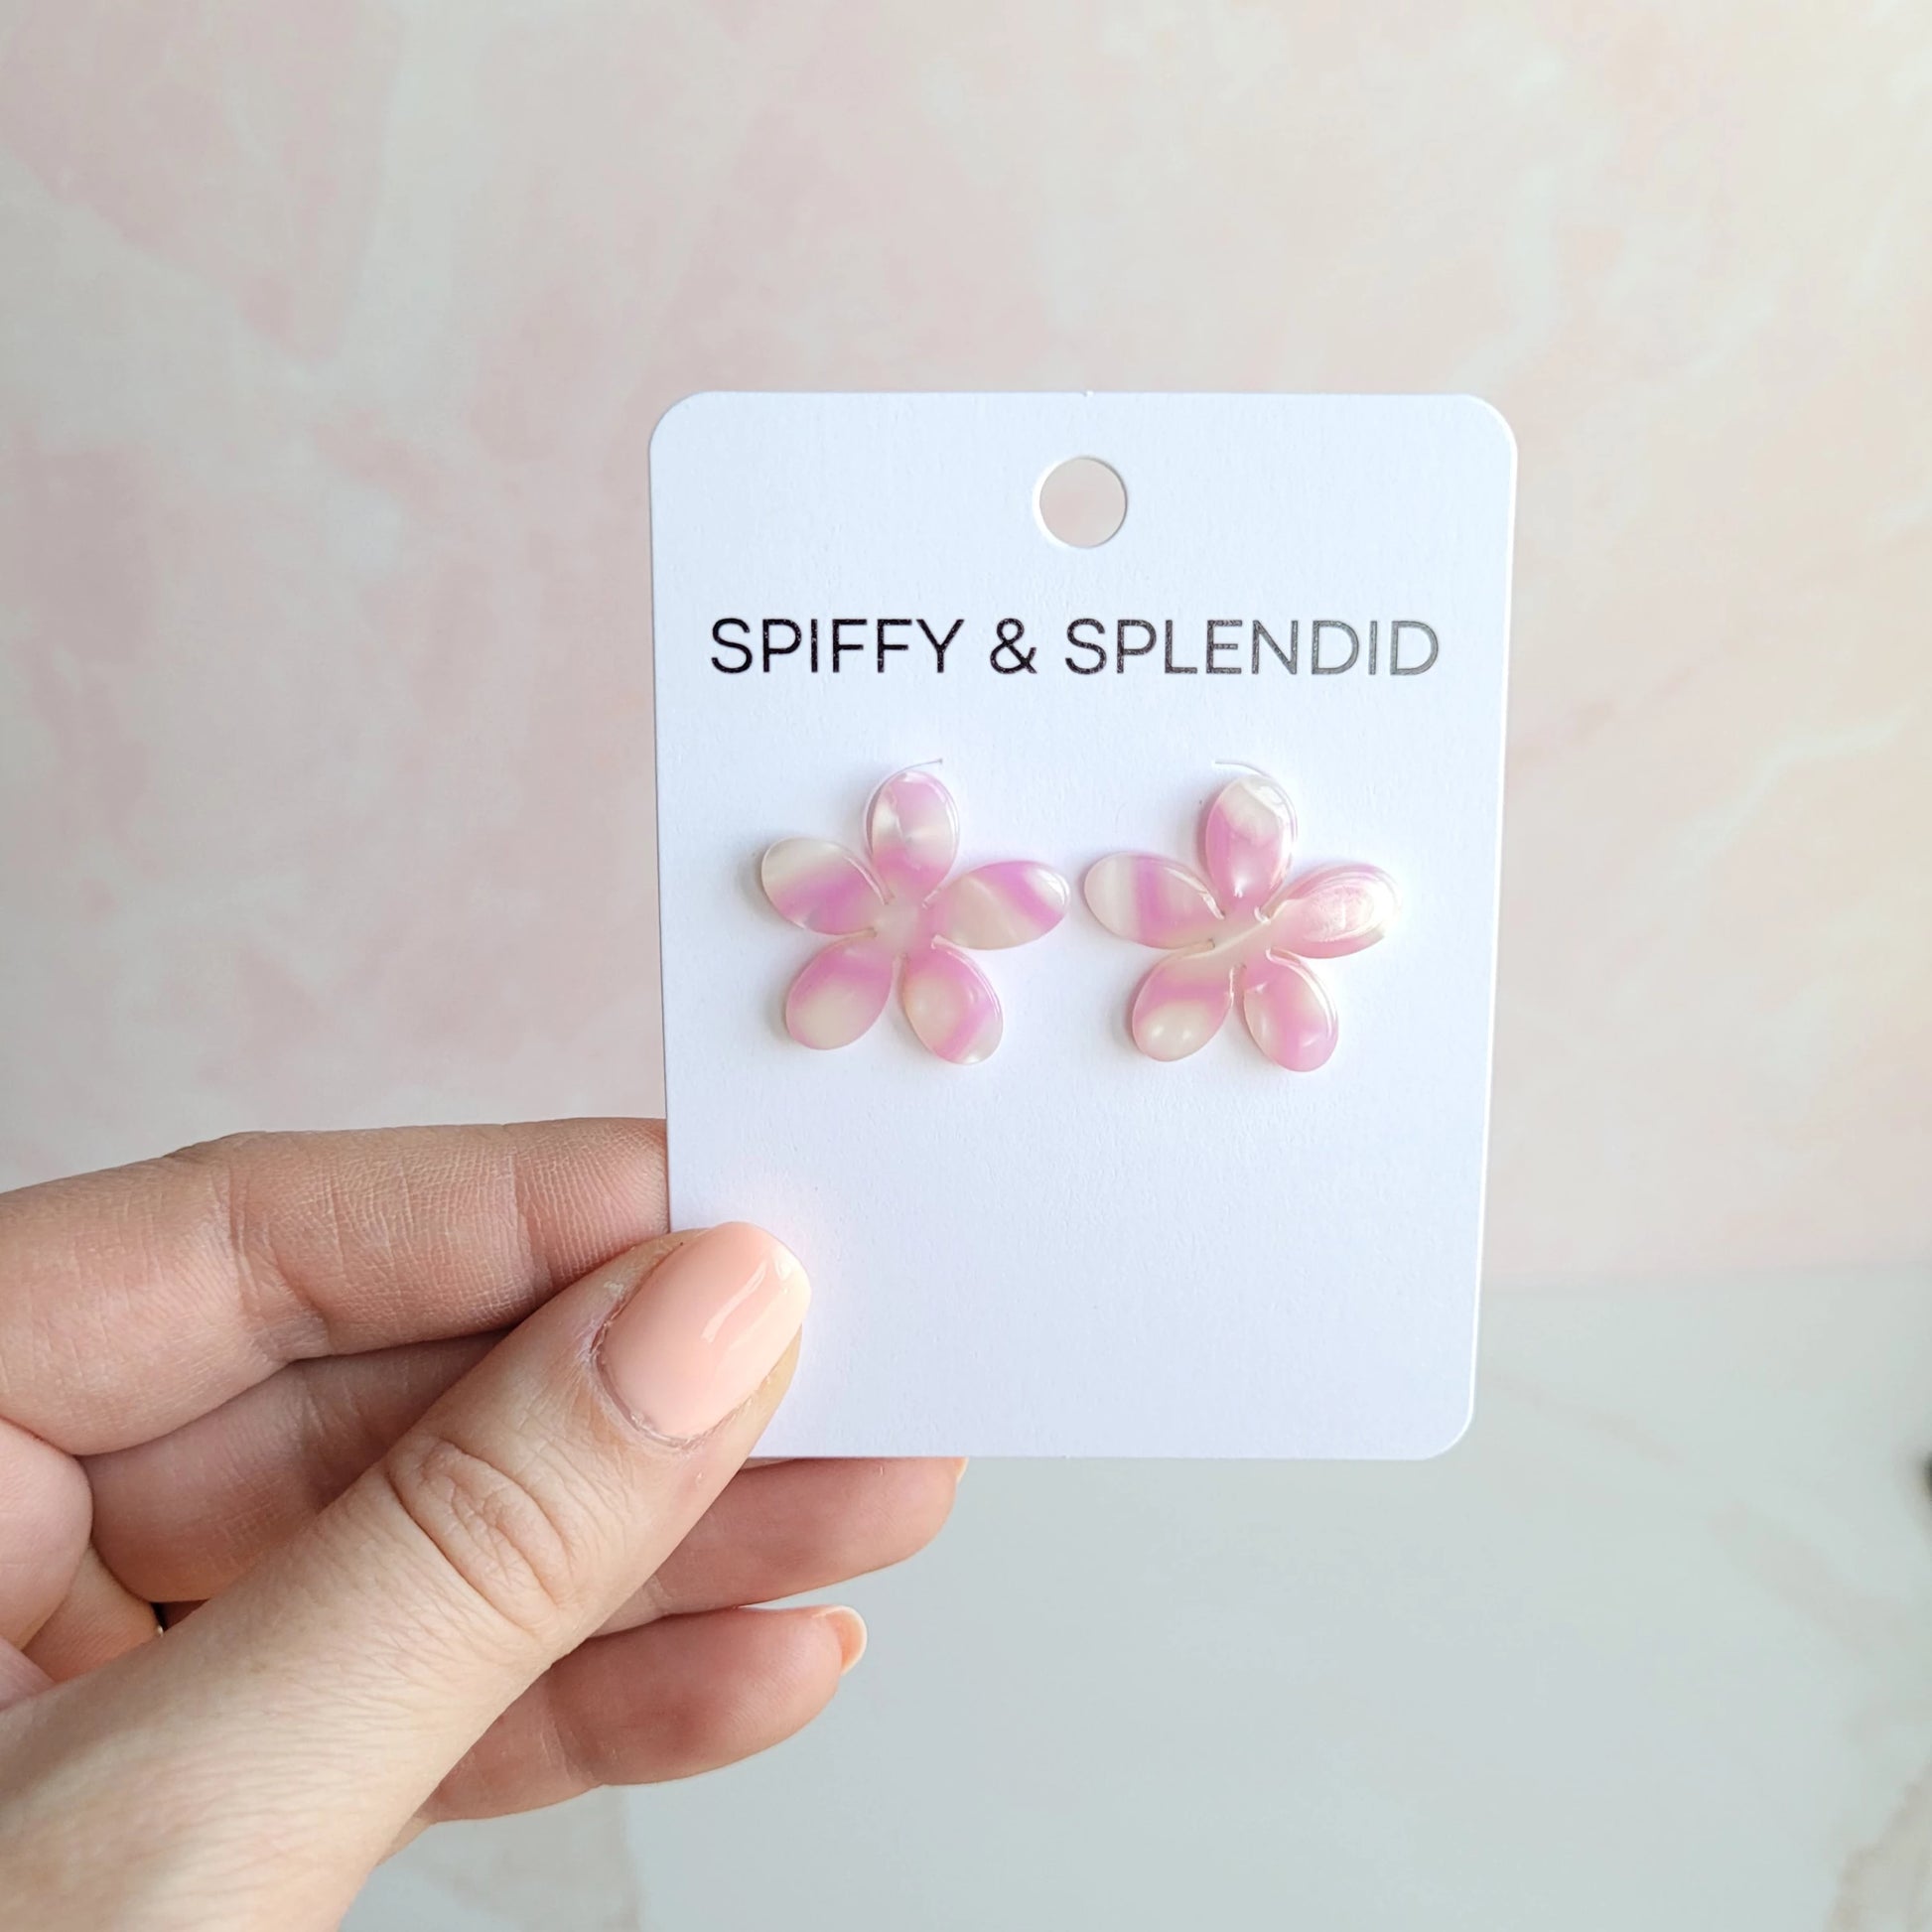 These adorable Blossom Studs will add a pop of personality to your outfit! They're the perfect accessory to brighten up your favorite outfit. 